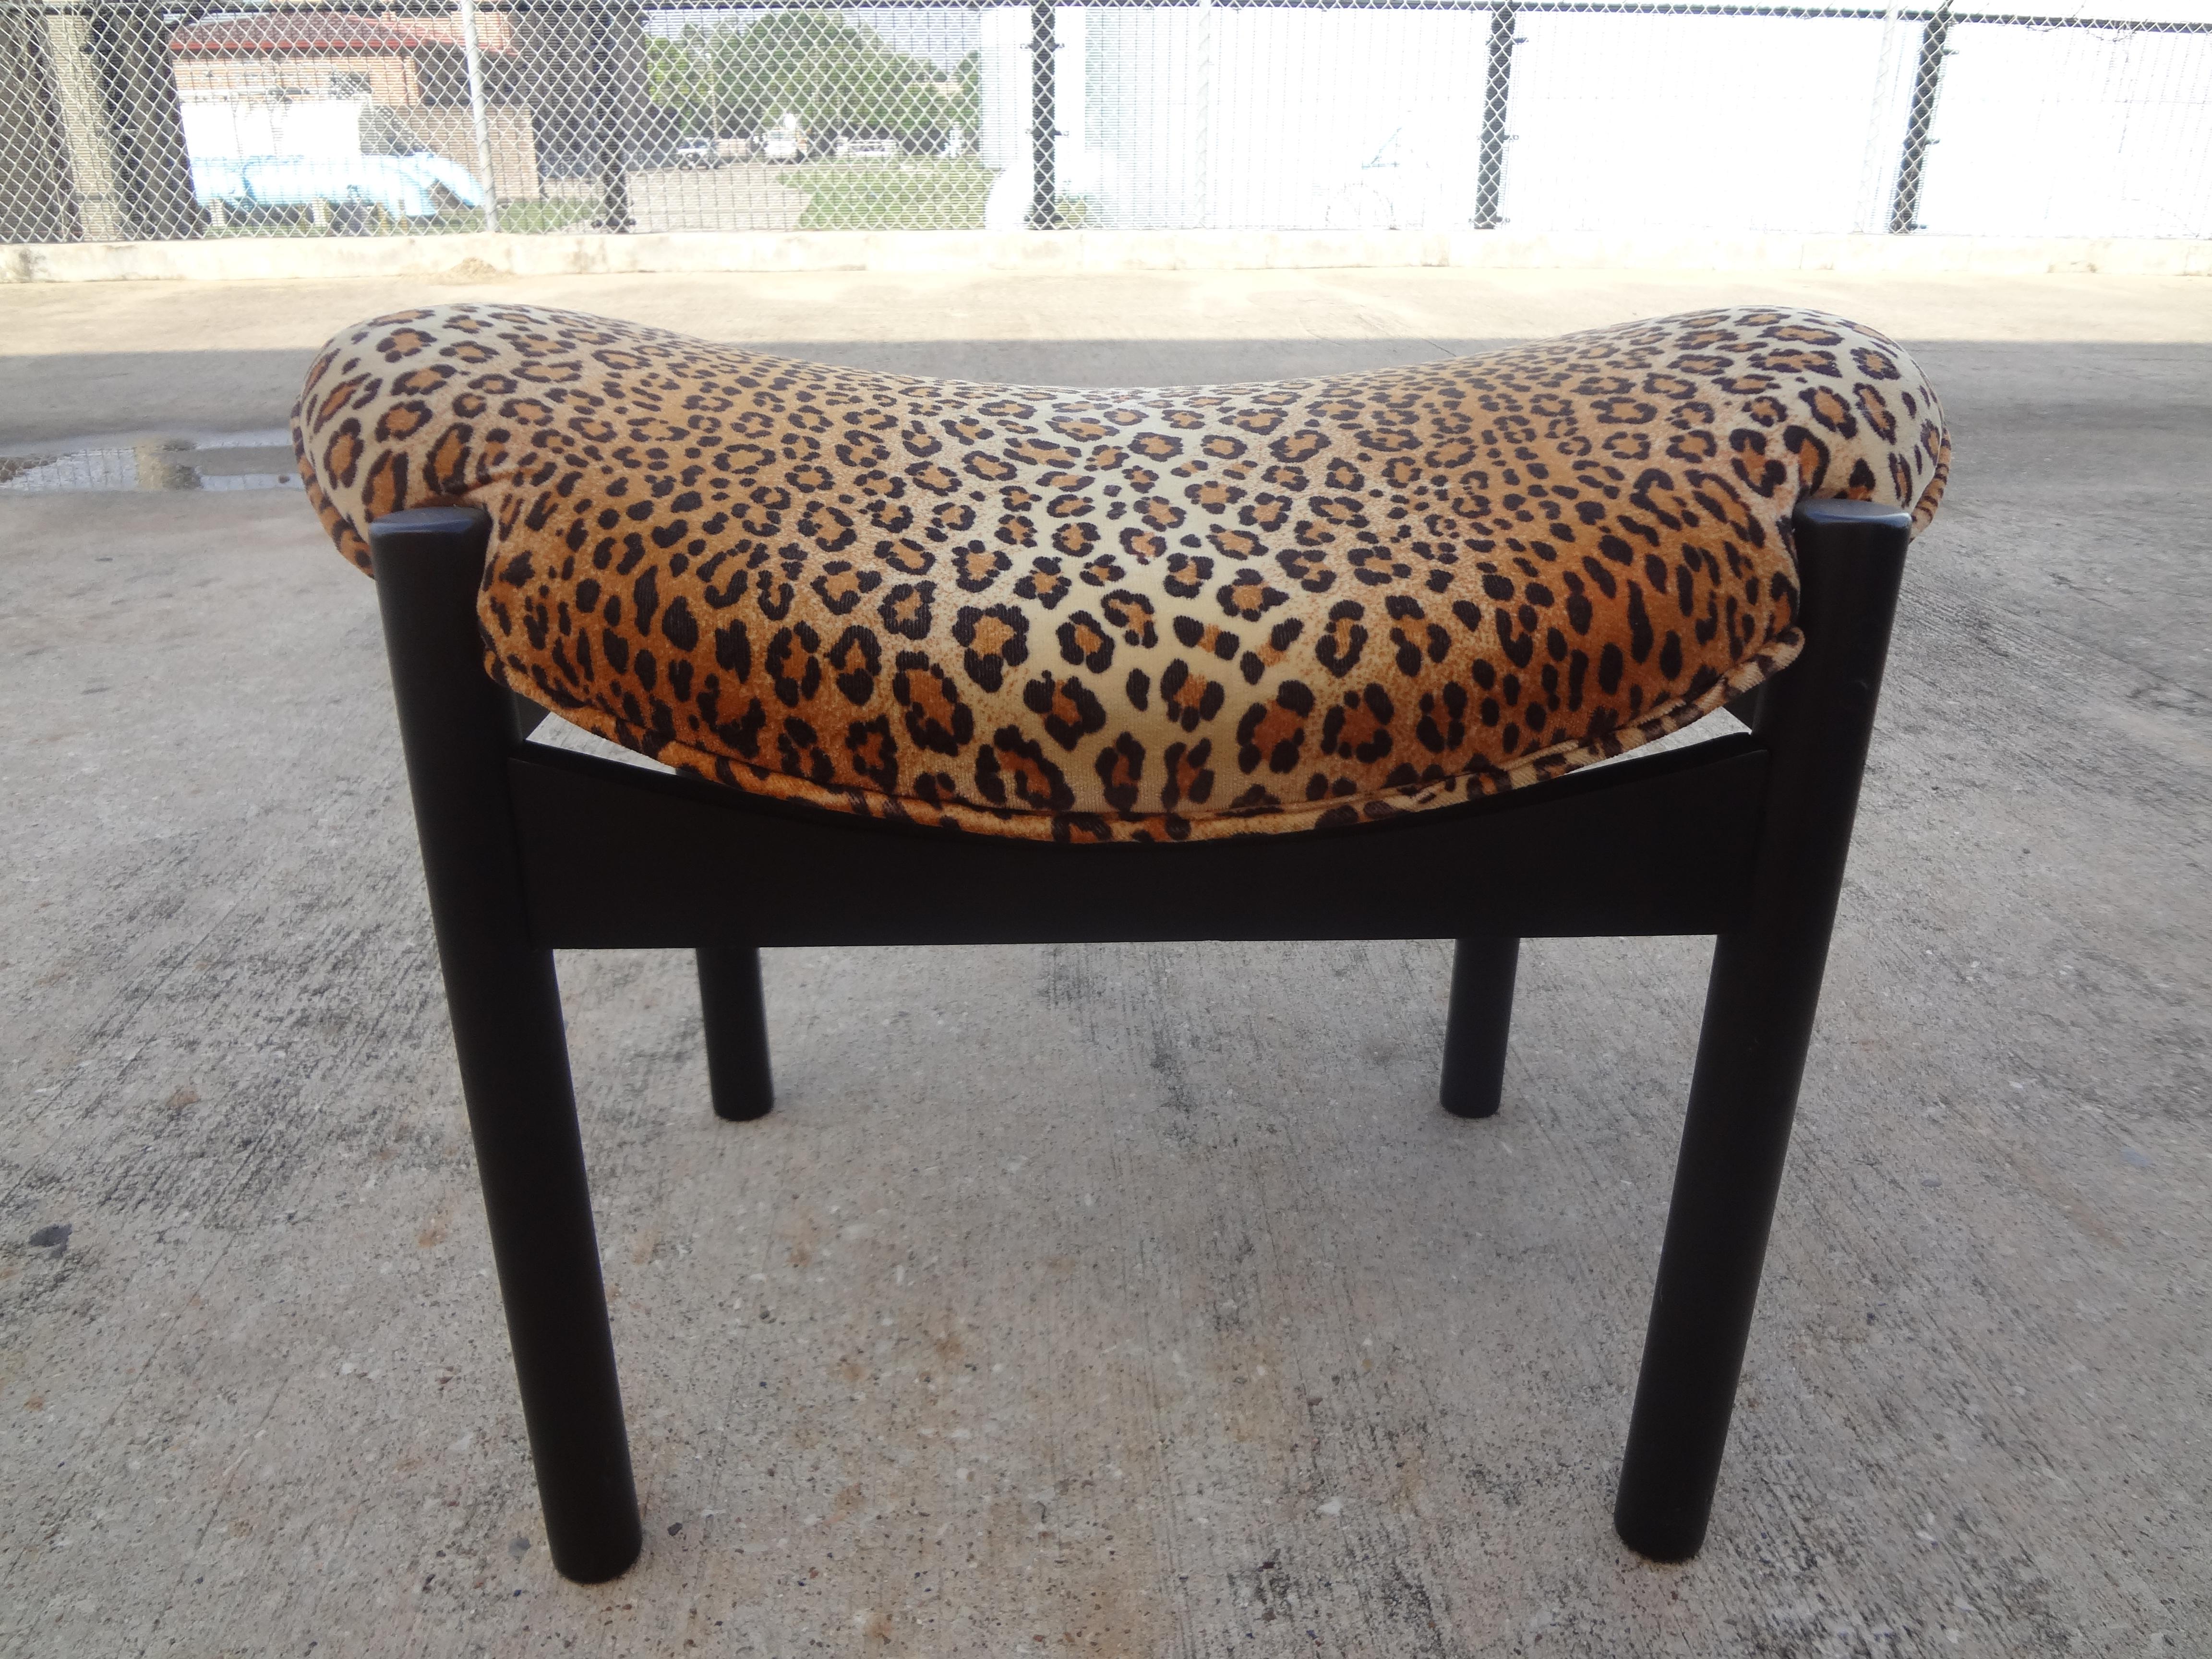 Stunning Arthur Umanoff Mid-Century Modern ebonized floating oval bench, ottoman or stool. This versatile ebonized bench can be used for extra seating, as a vanity stool or in a powder room.